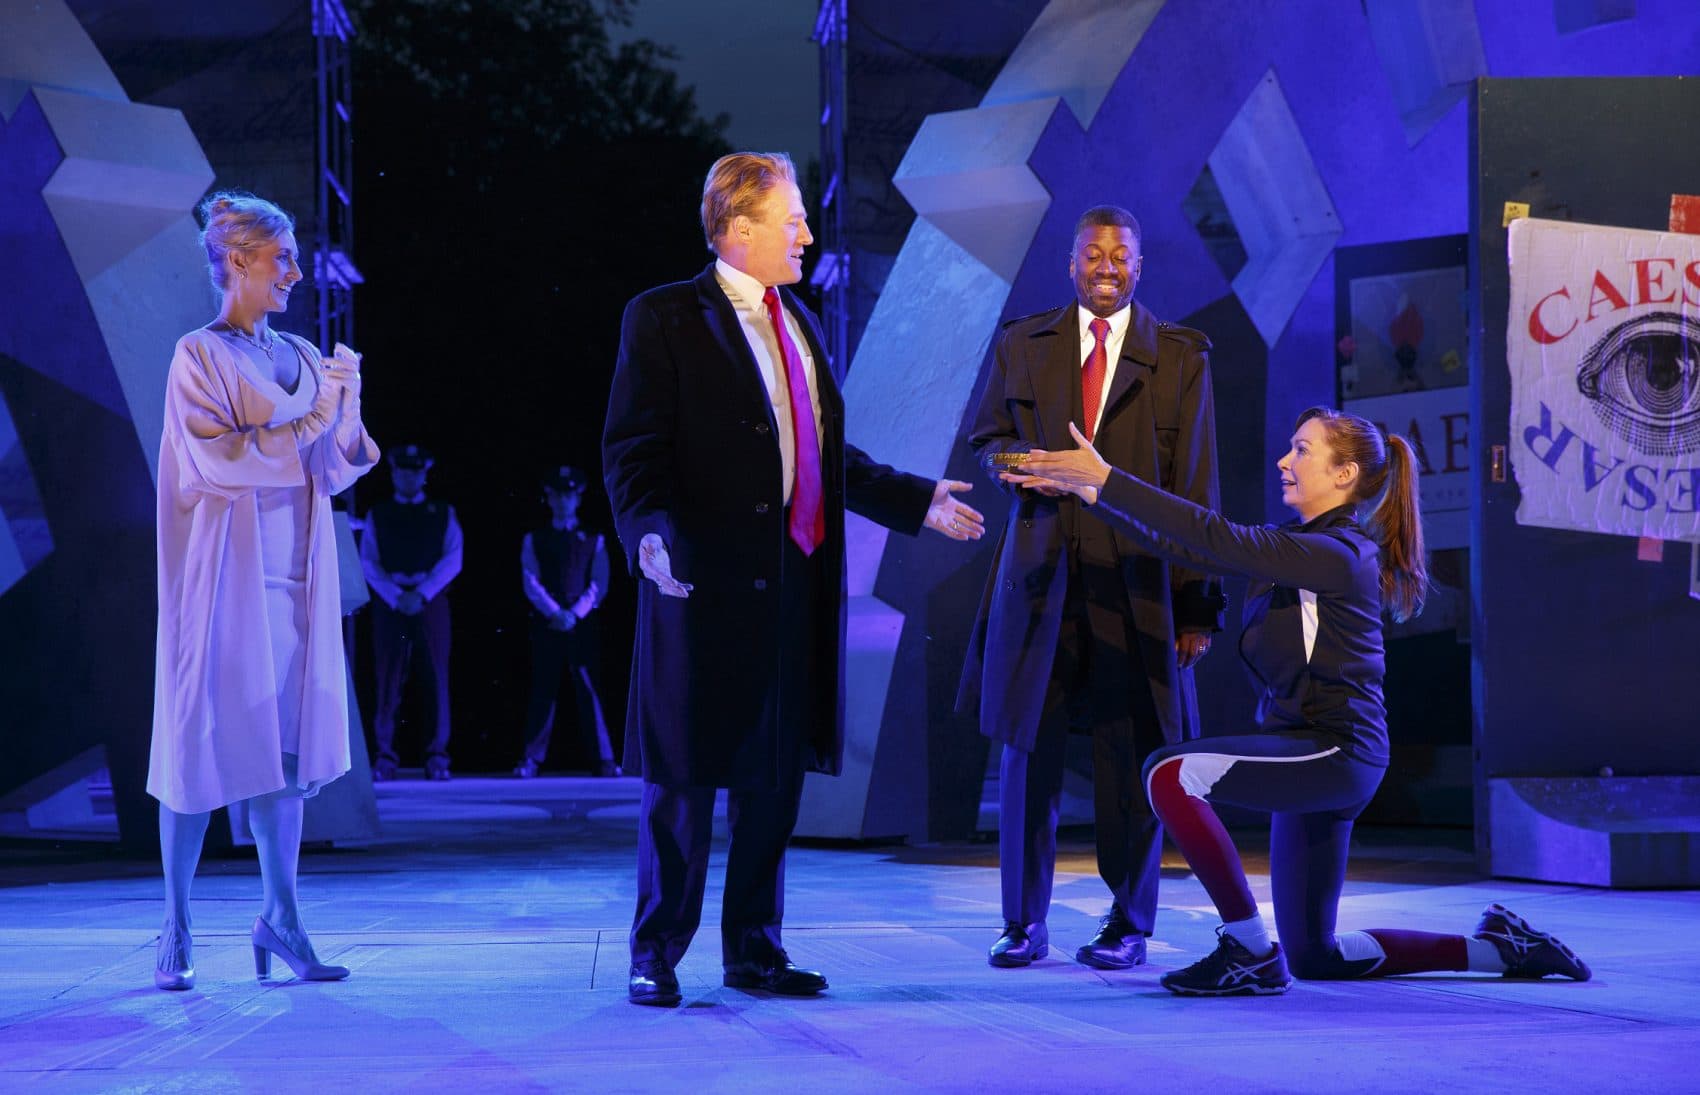 Tina Benko, left, portrays Melania Trump in the role of Caesar's wife, Calpurnia, and Gregg Henry, center left, portrays President Trump in the role of Julius Caesar during a dress rehearsal in May of The Public Theater's production of &quot;Julius Caesar&quot; in New York. (Joan Marcus/The Public Theater via AP)